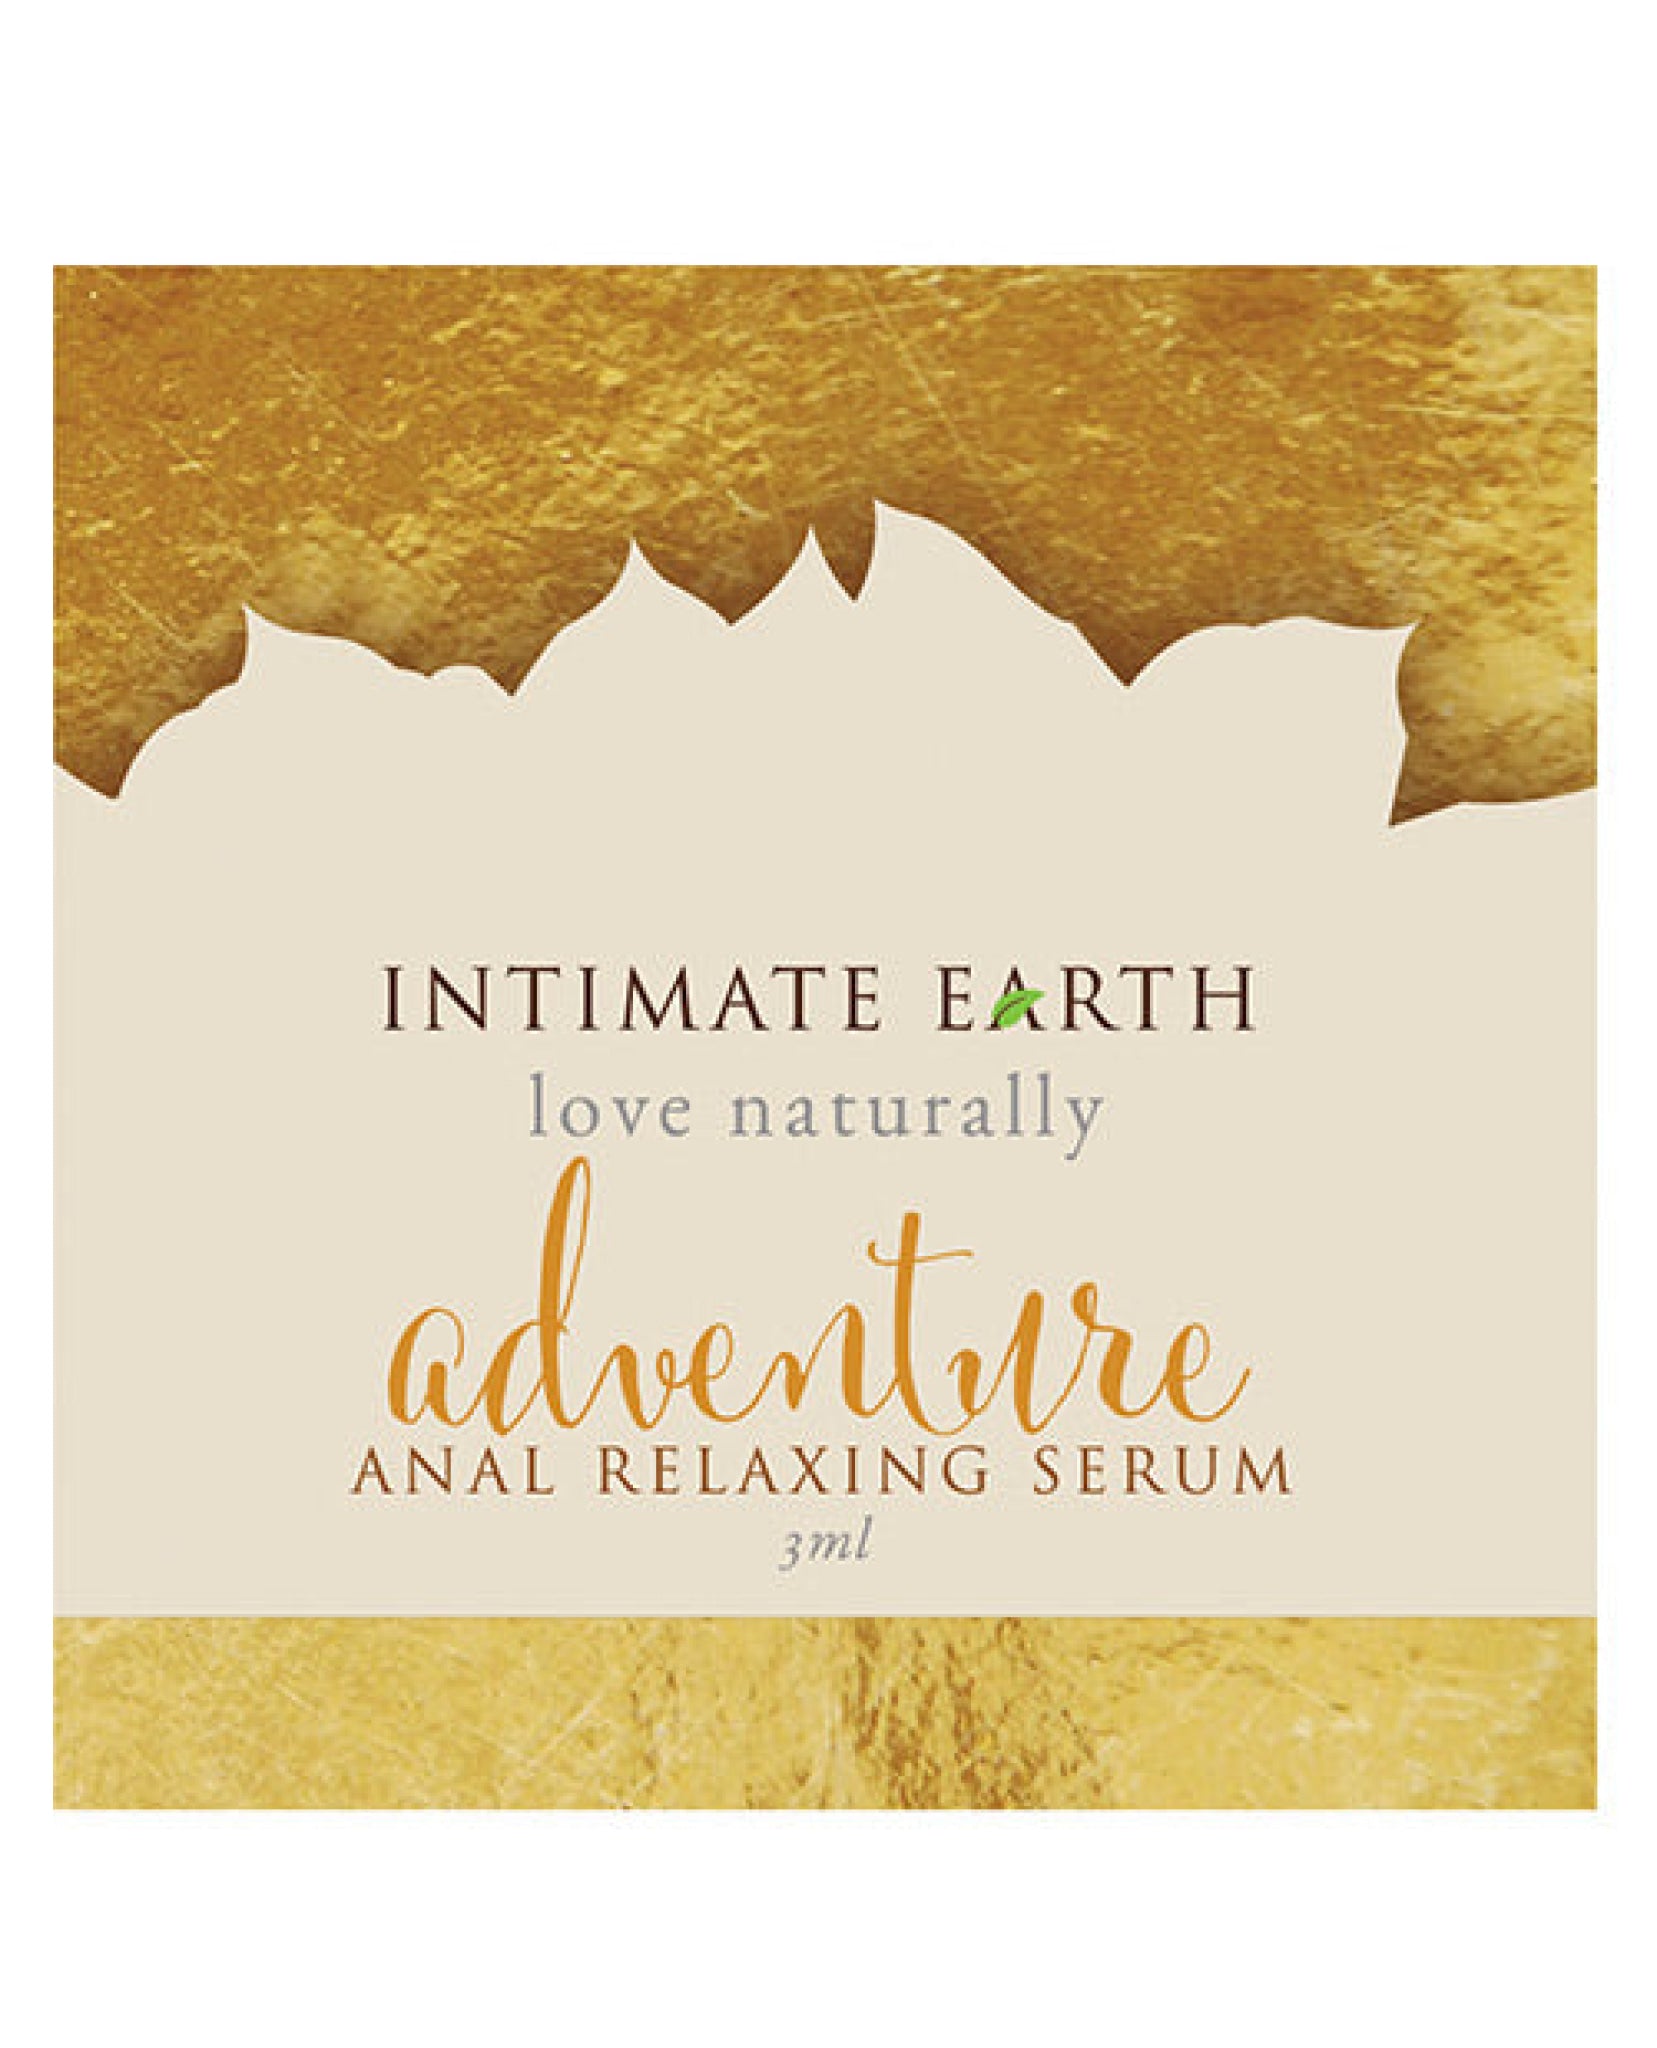 Intimate Earth Adventure Anal Relax Serum - 3 Ml Foil Intimate Earth